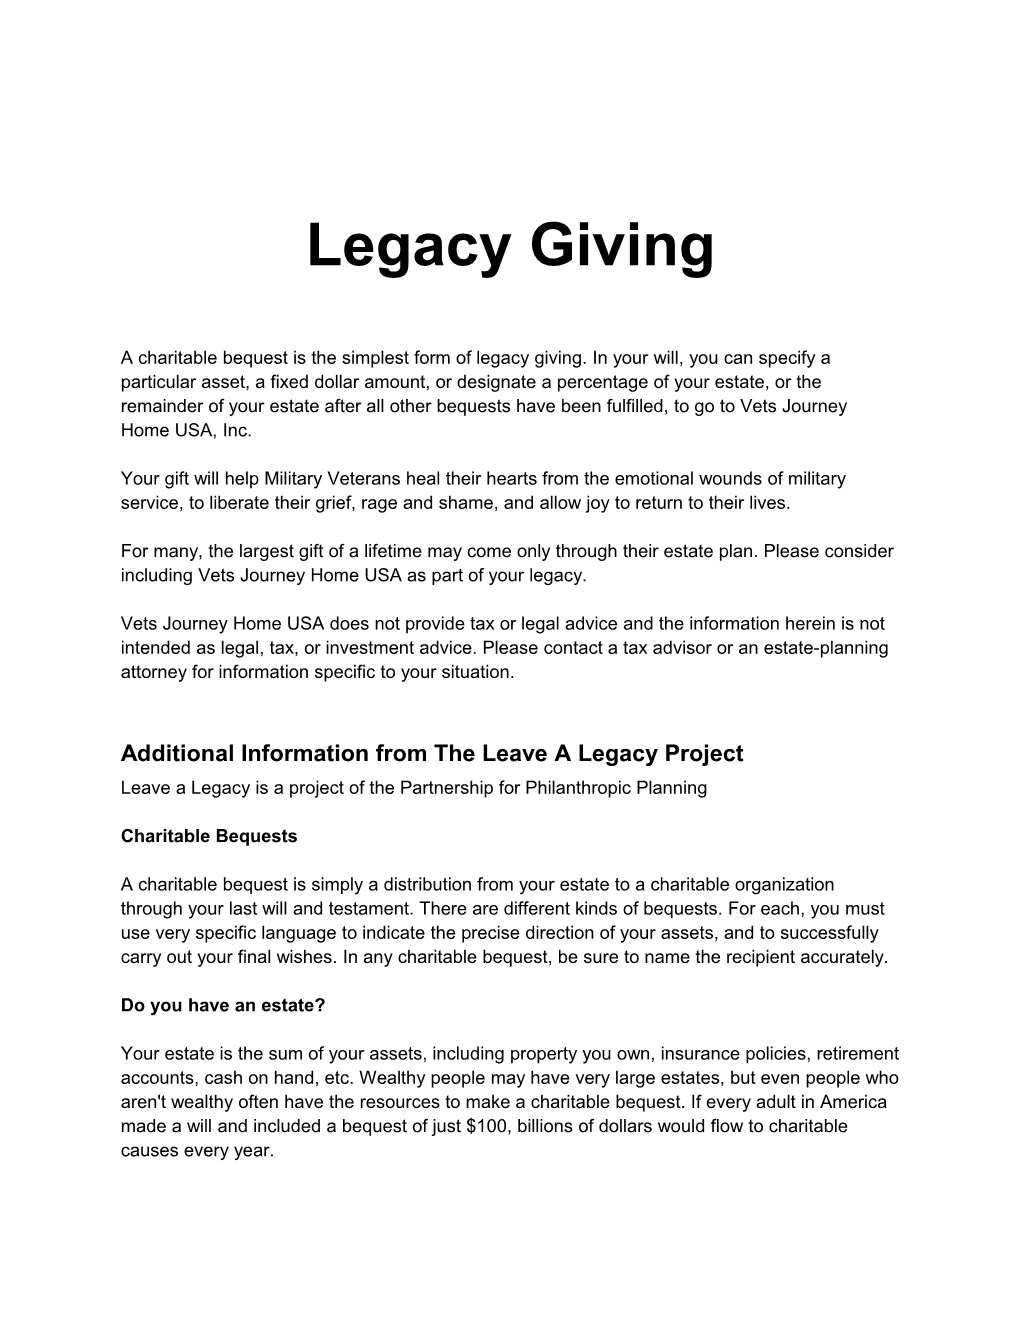 Additional Information from the Leave a Legacy Project